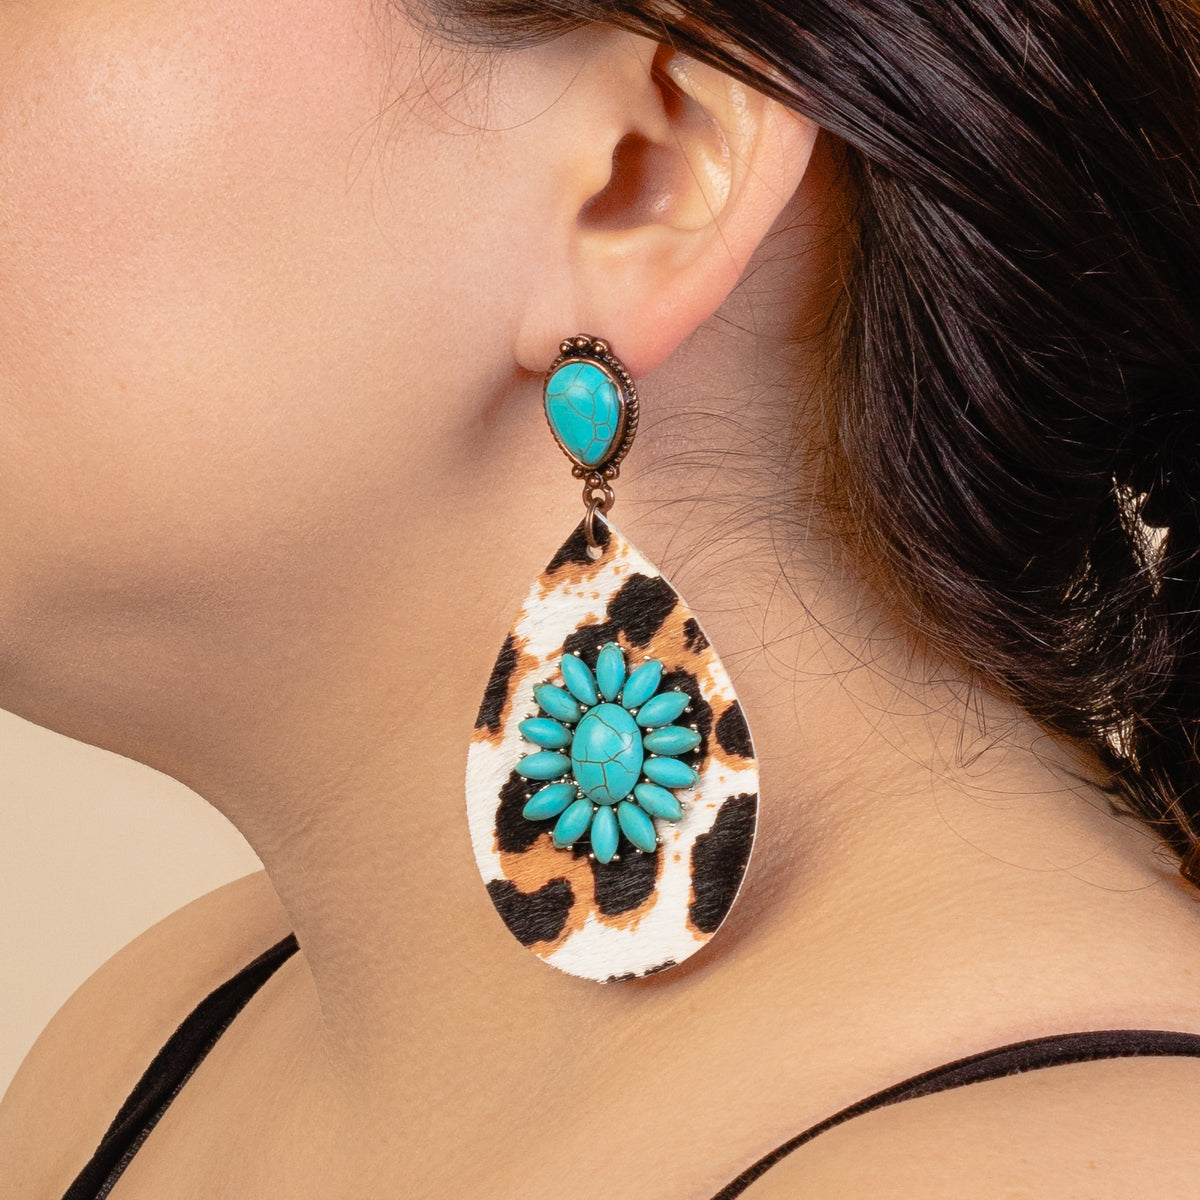 734003 - Turquoise and Leopard Earrings - Turquoise & Silver